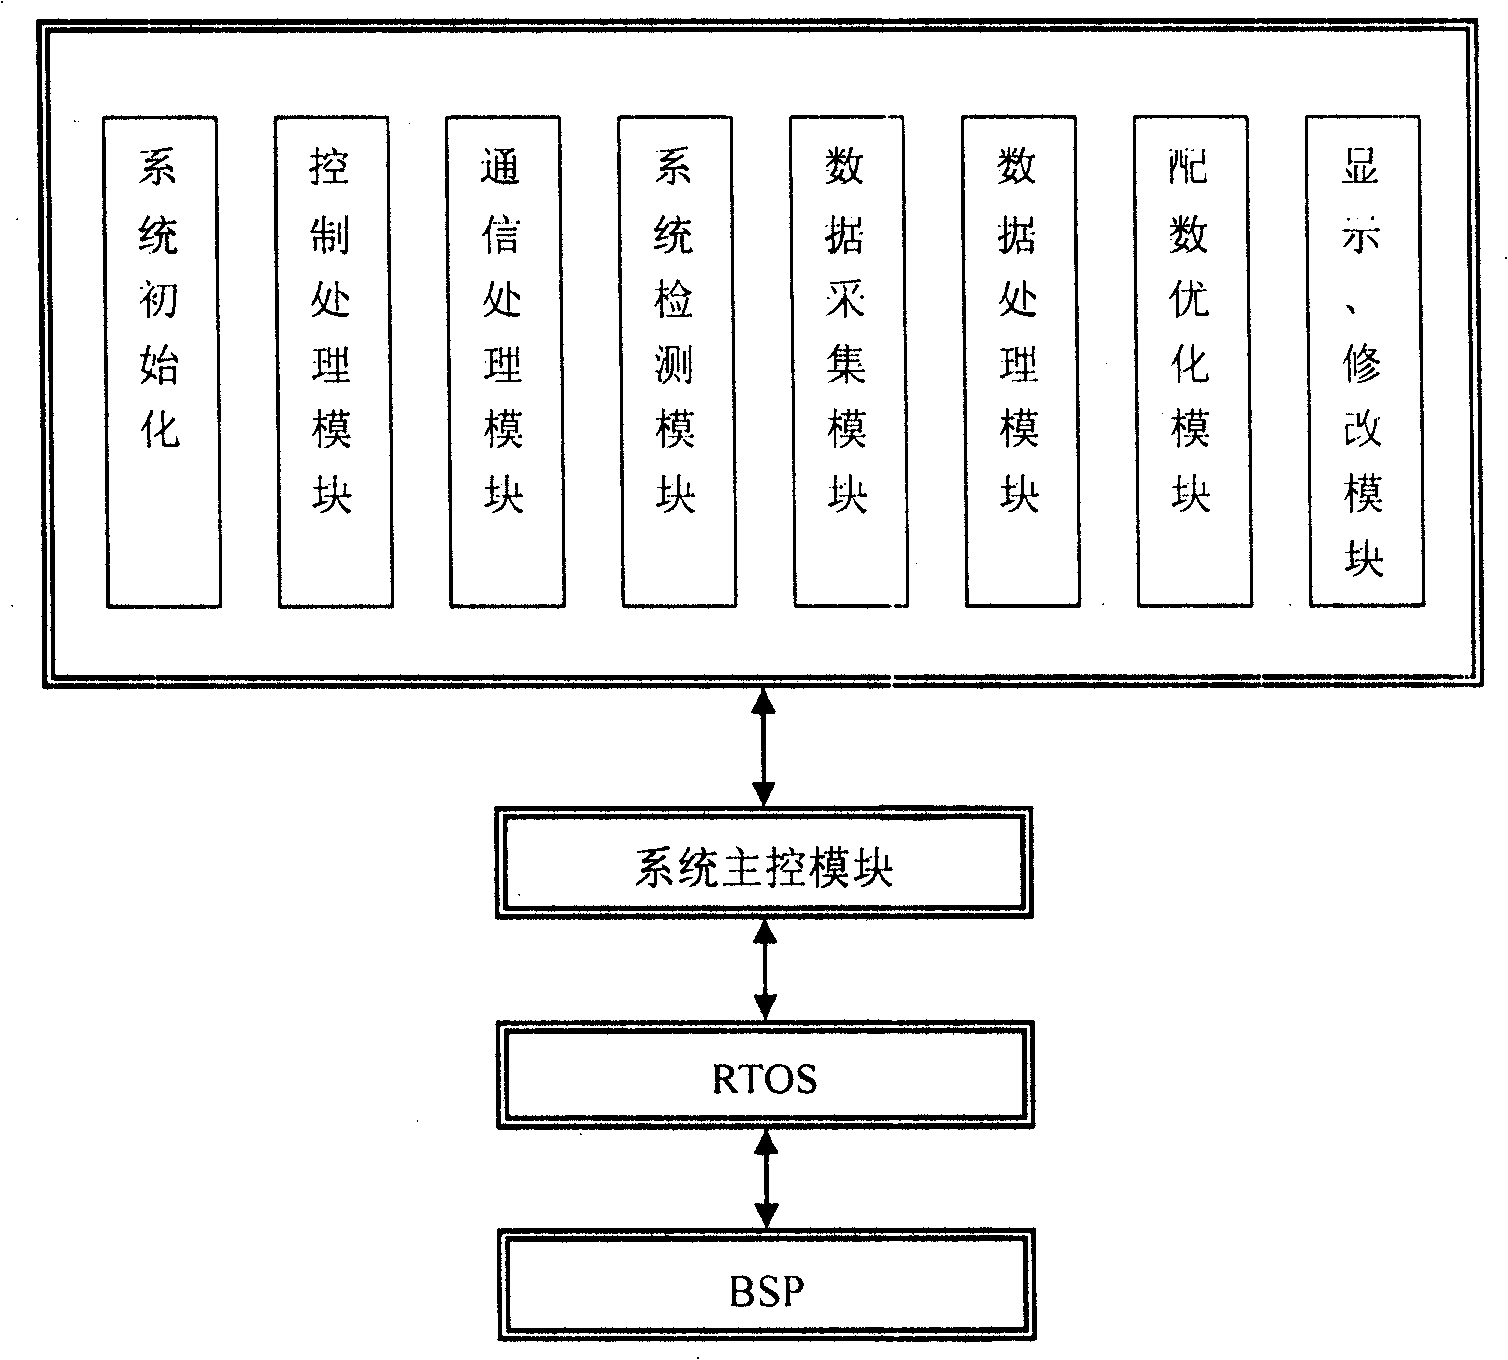 Coordination control method for area mixed traffic self-adaption signal